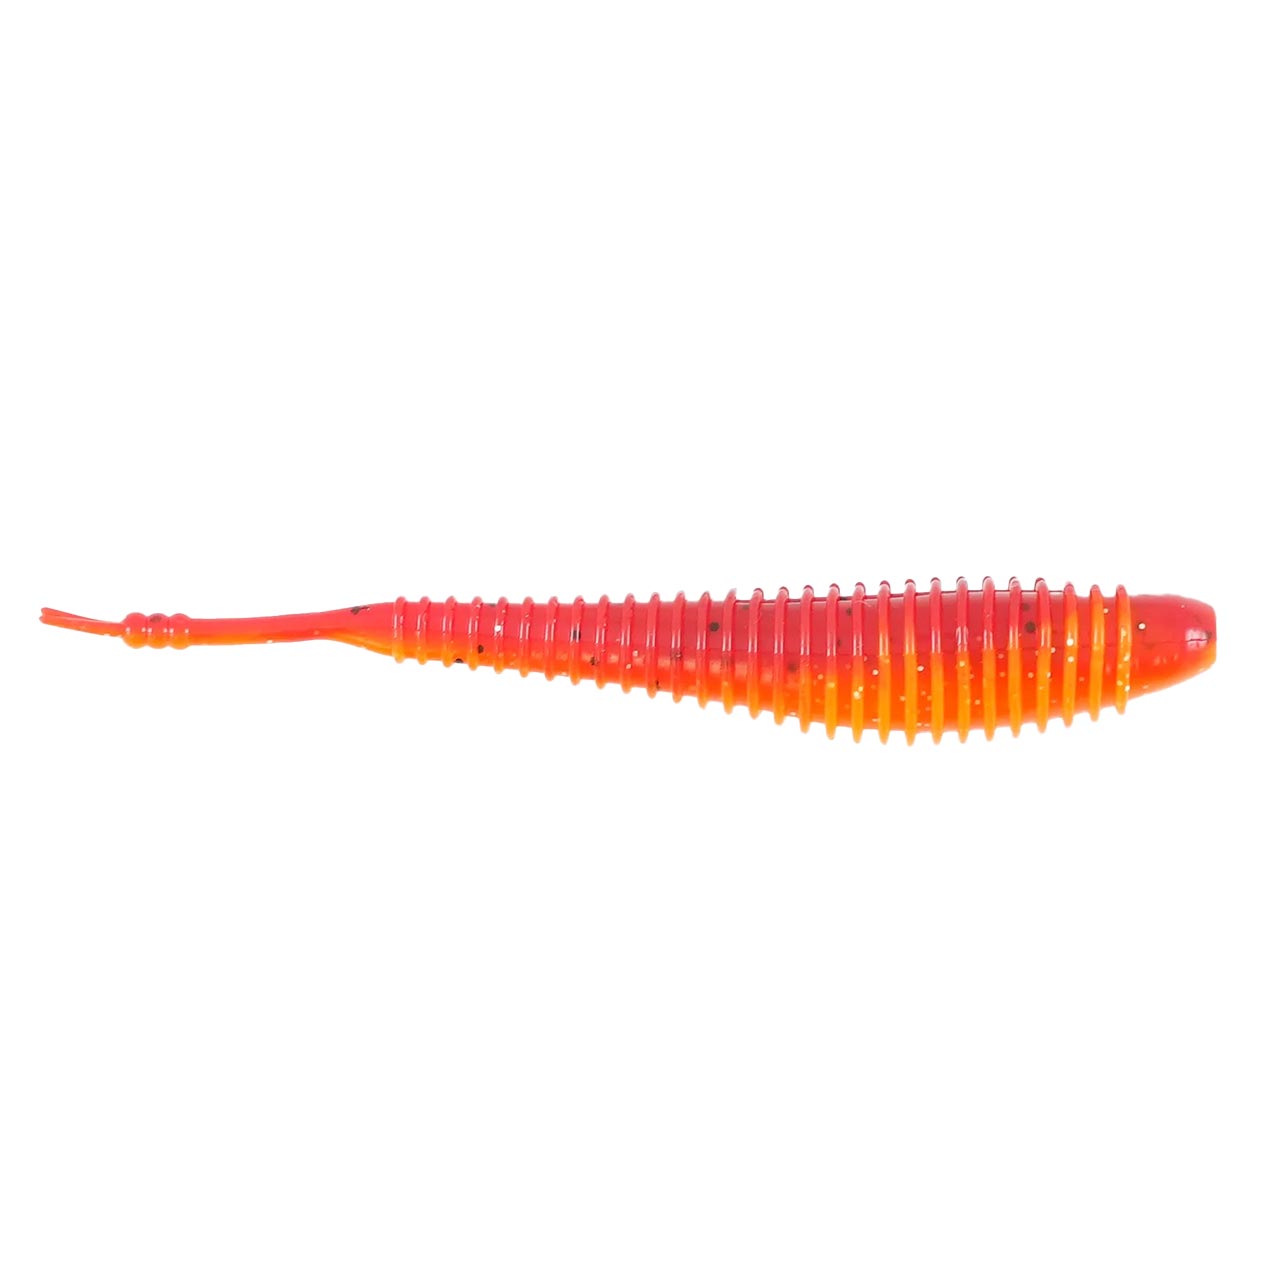 Missile Baits Spunk Shad - 5.5in - Lava Craw